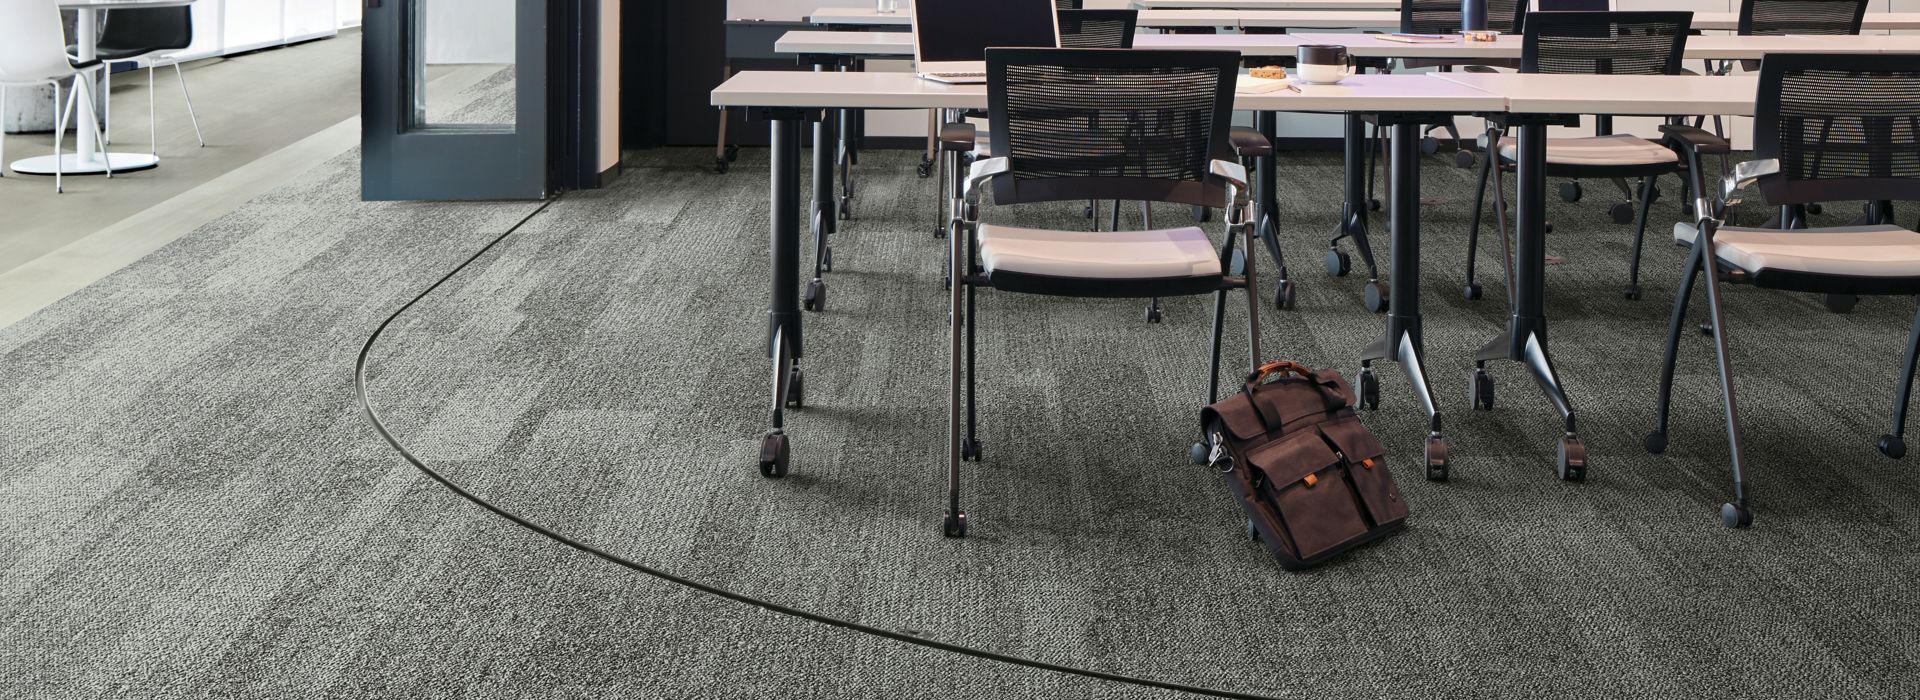 Interface Open Air 410 plank carpet tile in open conference room with satchel leaning on chair numéro d’image 1